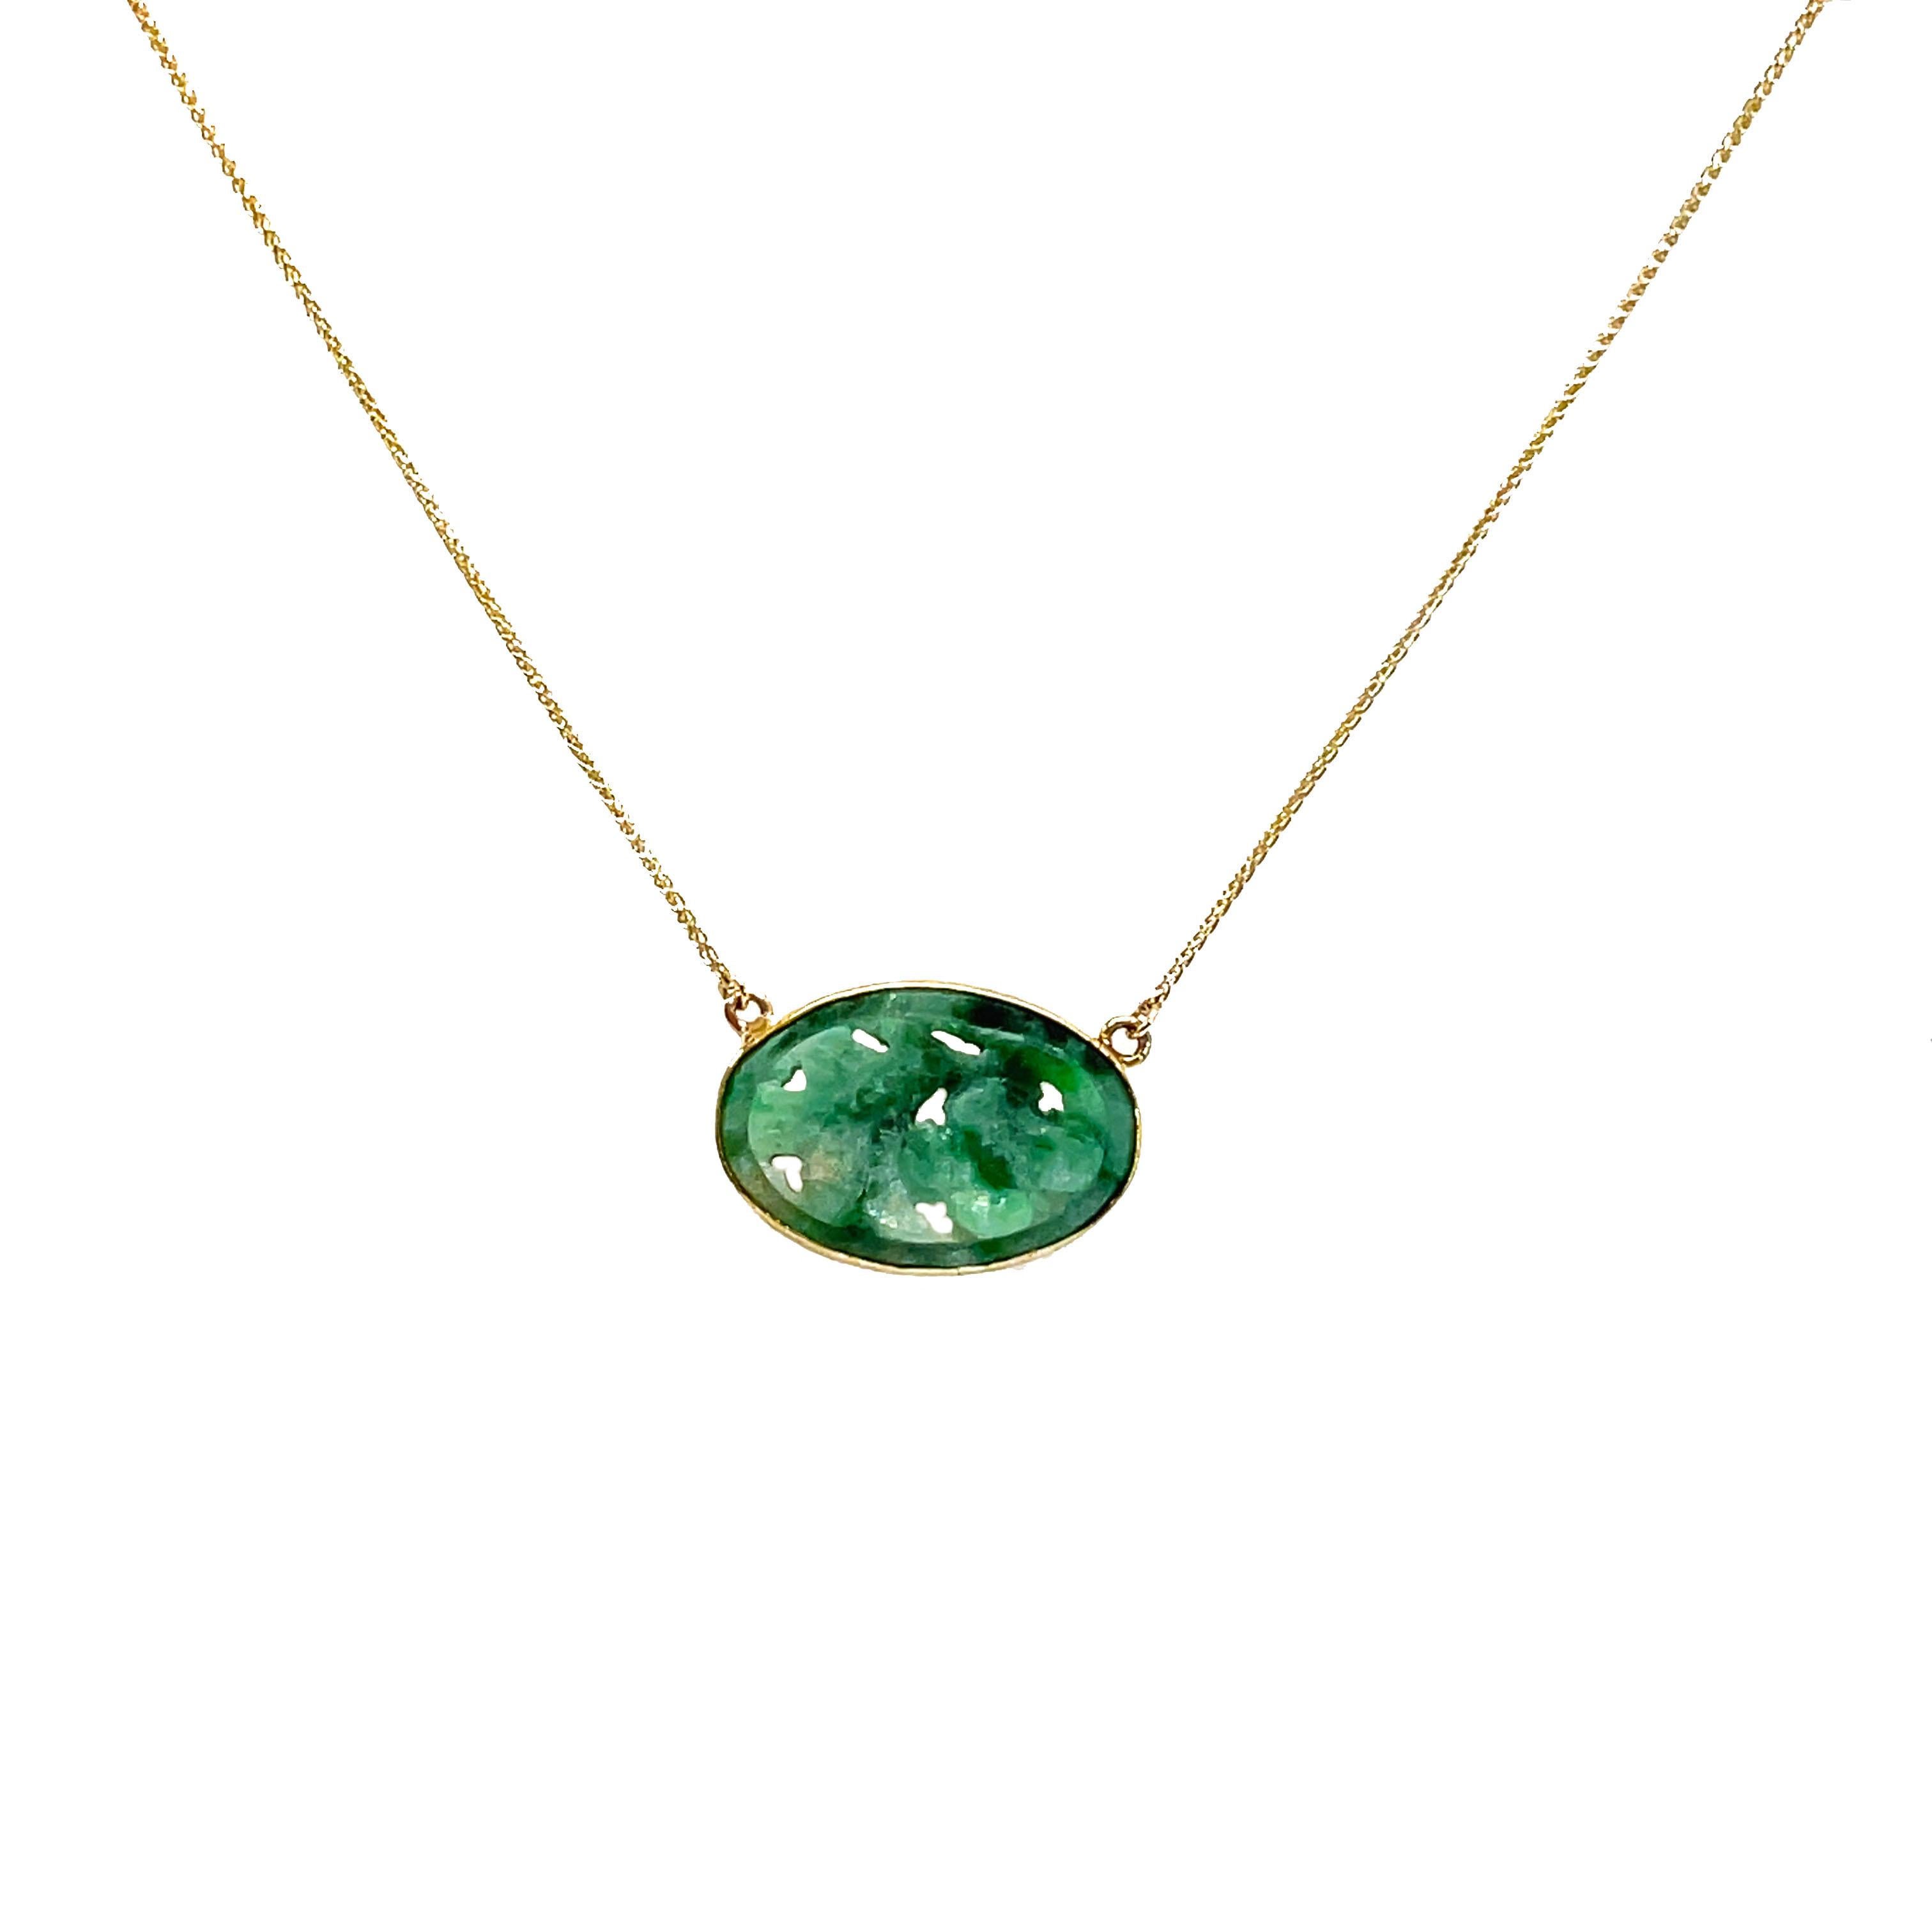 This is an absolutely beautiful necklace set in 14K yellow gold with a bezel set jade nephrite that has been hand-carved into a flower pattern! This necklace carries so much beauty in its's simplistic design. The warm golden bezel complements the